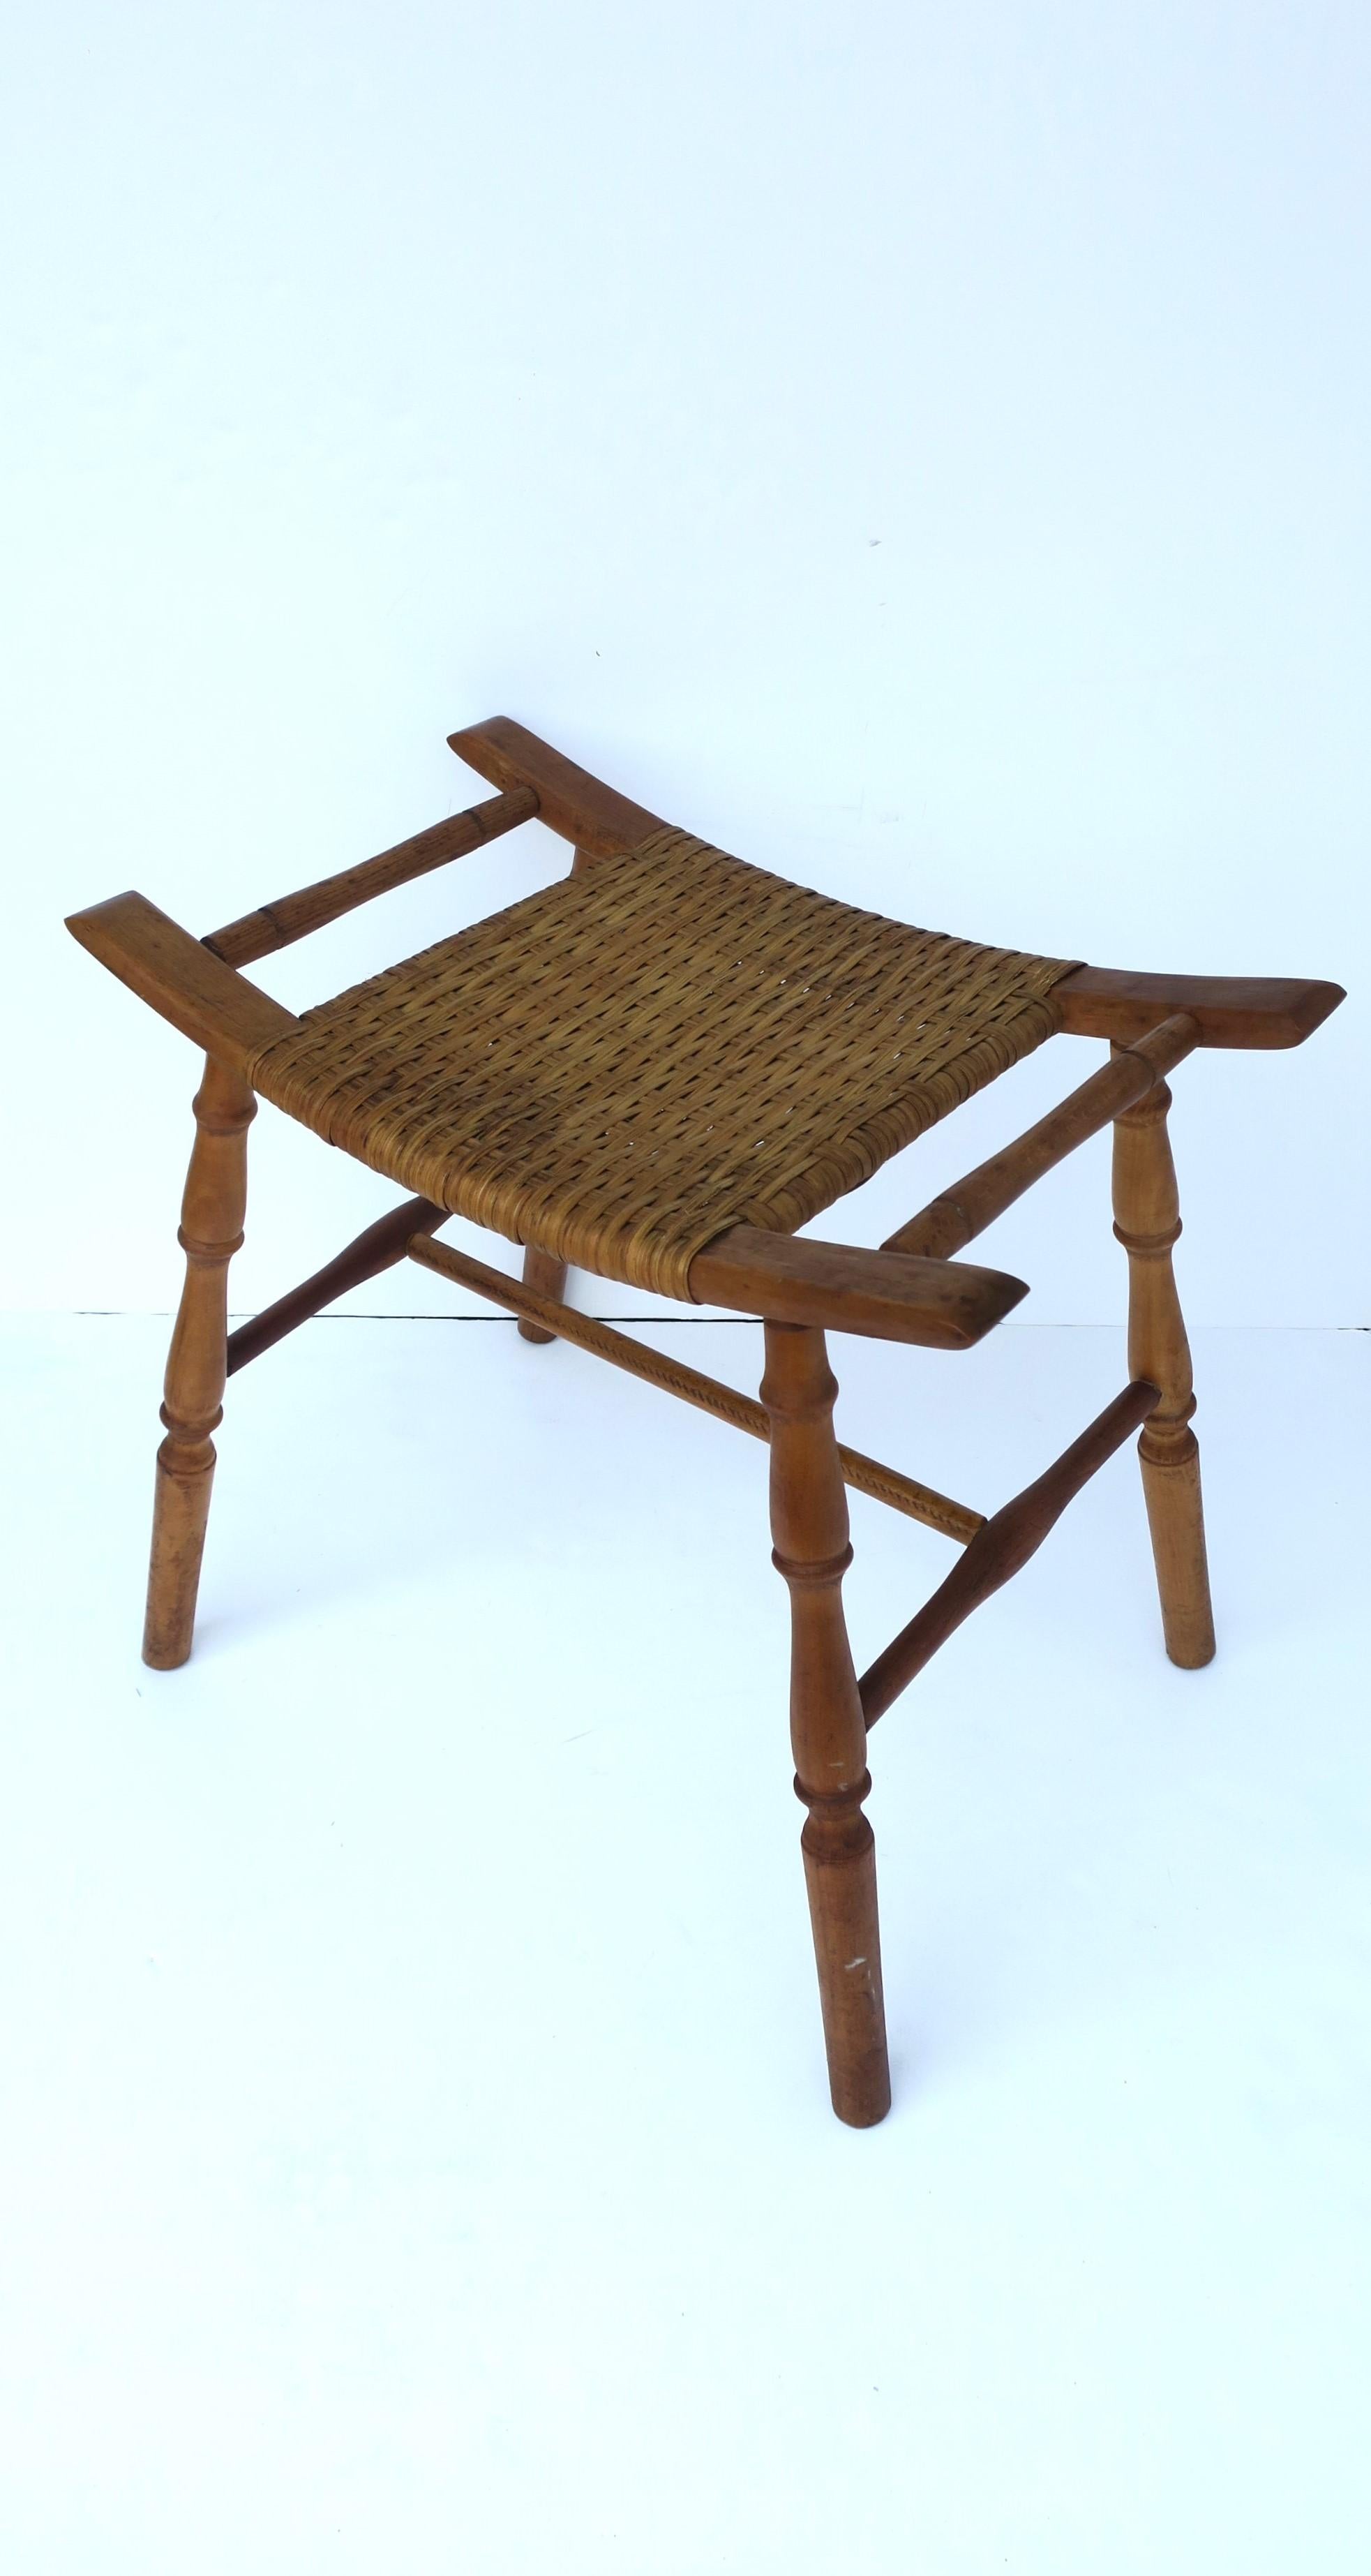 A wicker and oak wood turned stool, in the Victorian style, circa mid-20th century USA. Piece is rectangular with a wicker seat and turned legs. Great as a seat/stool or to hold/display books, a cocktail, plant, etc. 

Overall Dimensions: 14.25